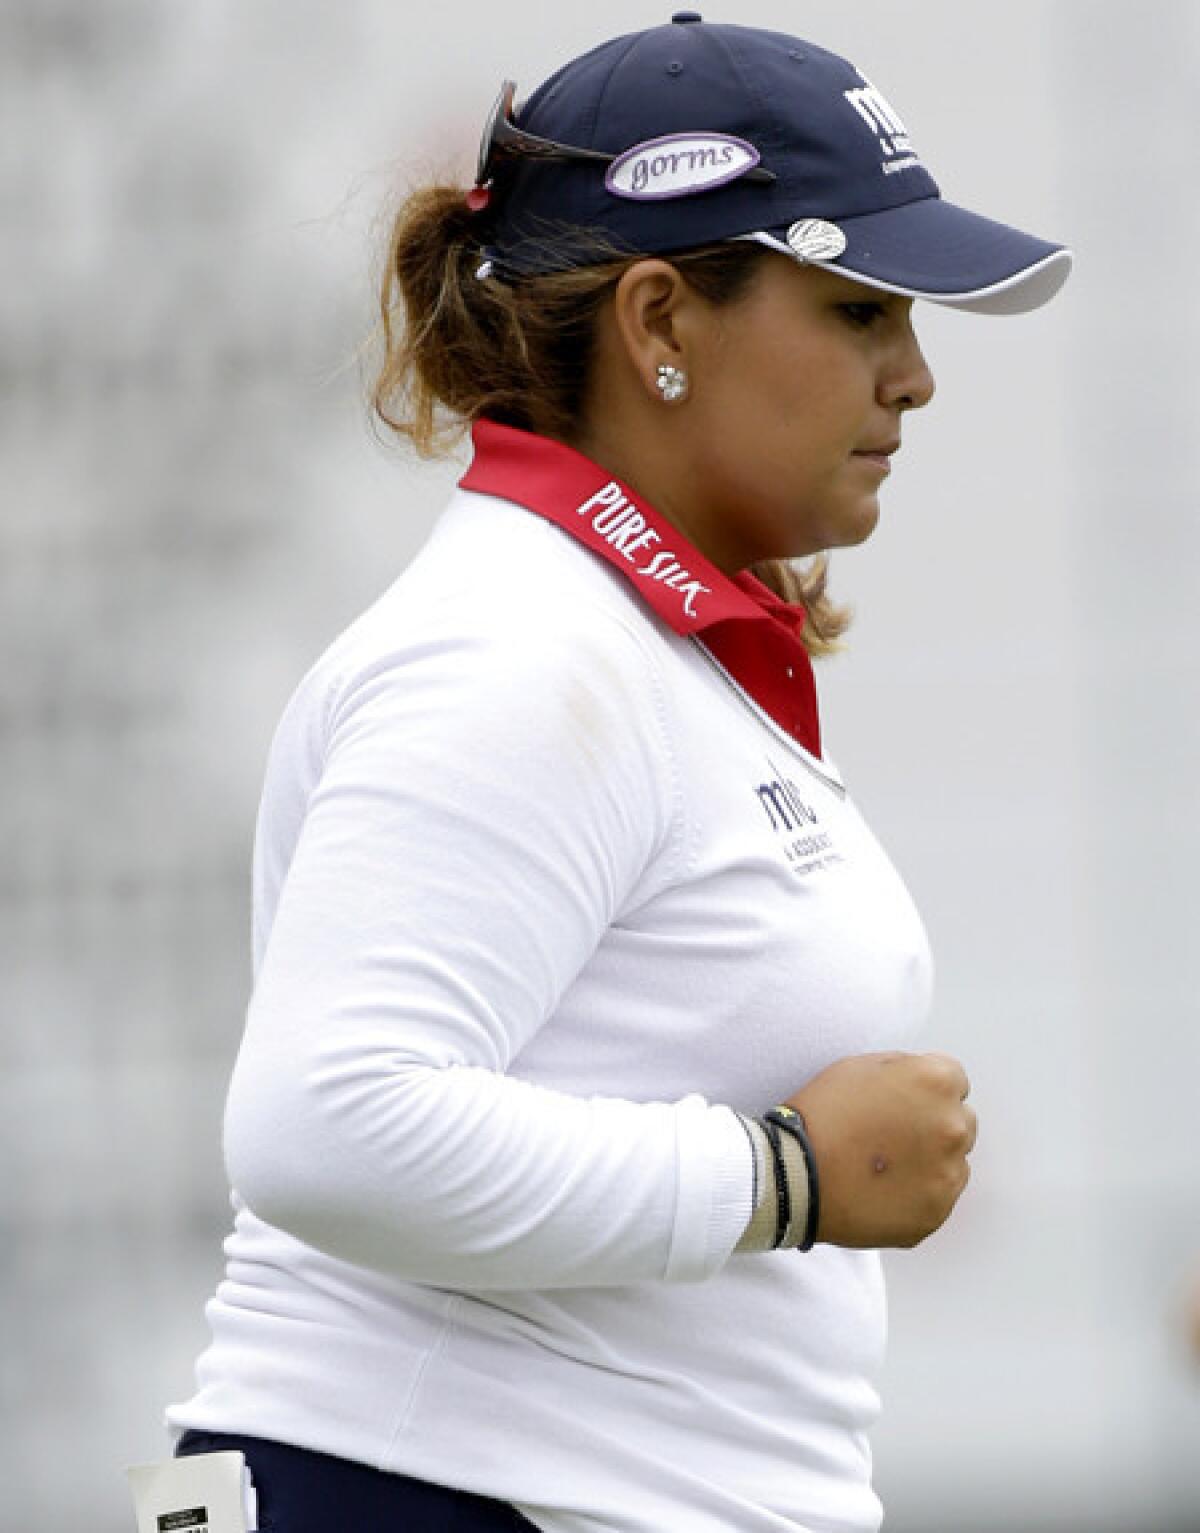 Lizette Salas reacts after sinking a putt on the seventh hole Friday during the second round of the U.S. Women's Open.